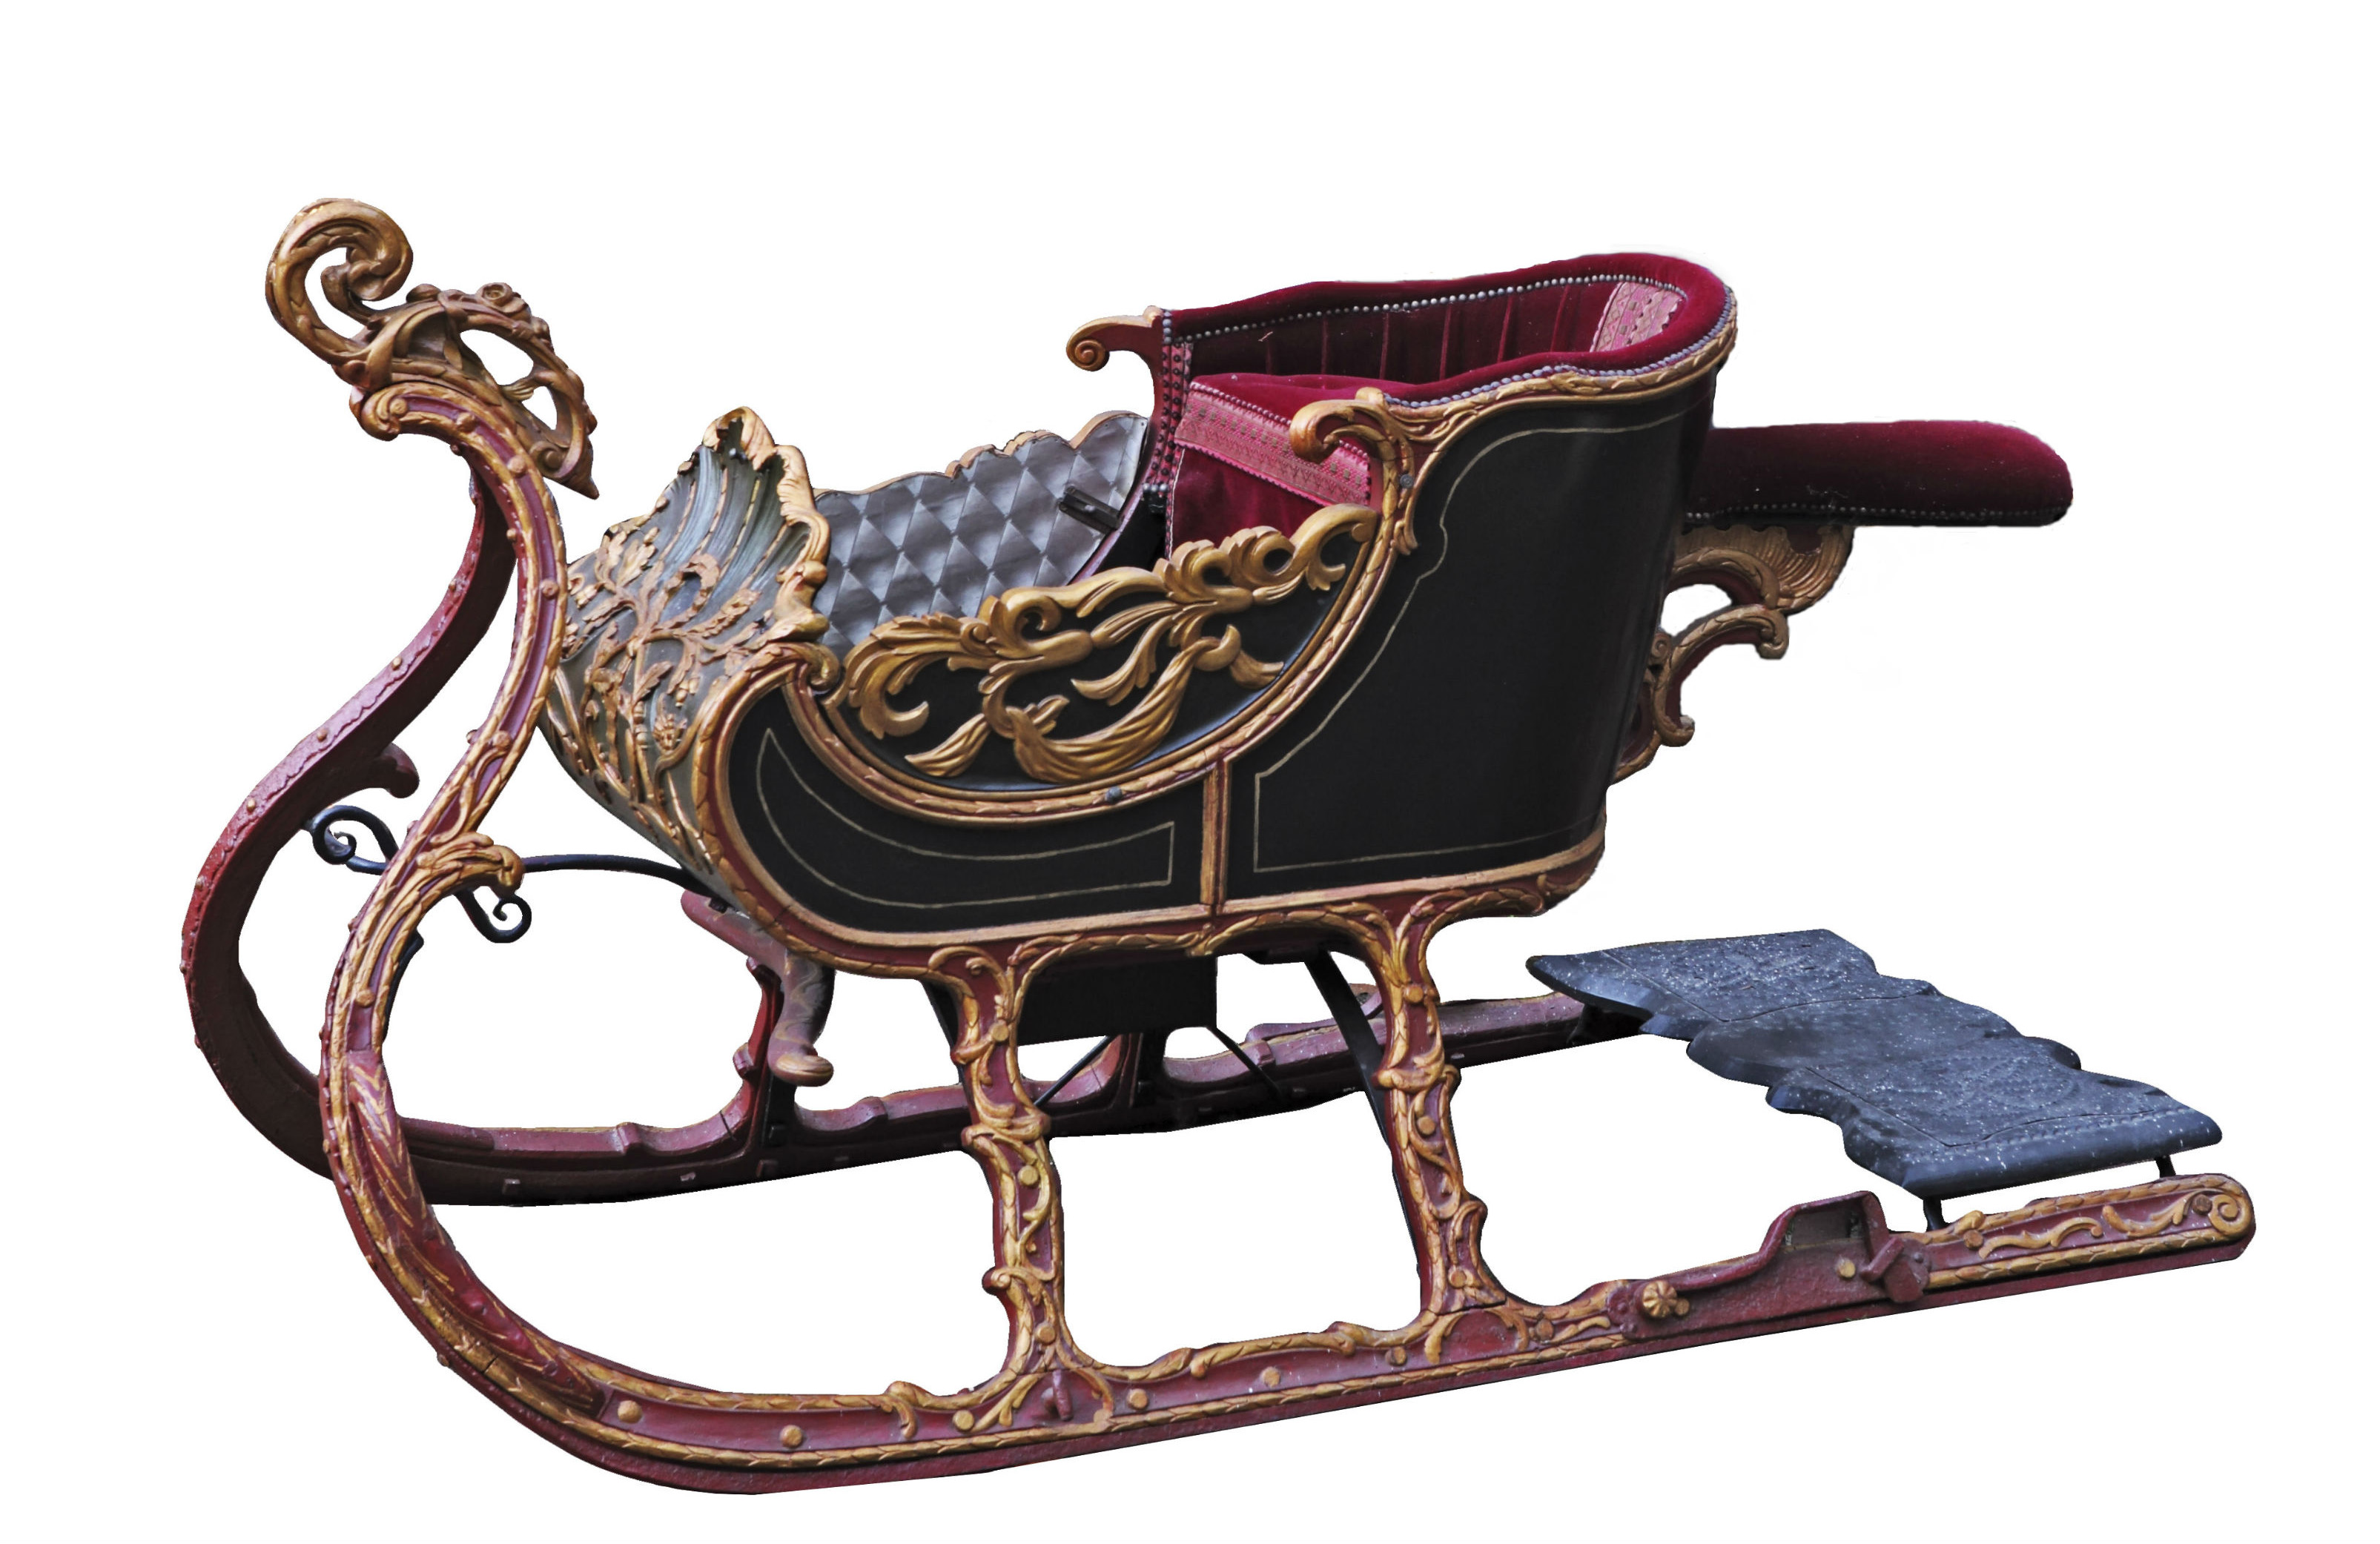 CHRISTMAS SLED TO FLY AT BONHAMS SINGLE-OWNER CARRIAGE COLLECTION SALE cover